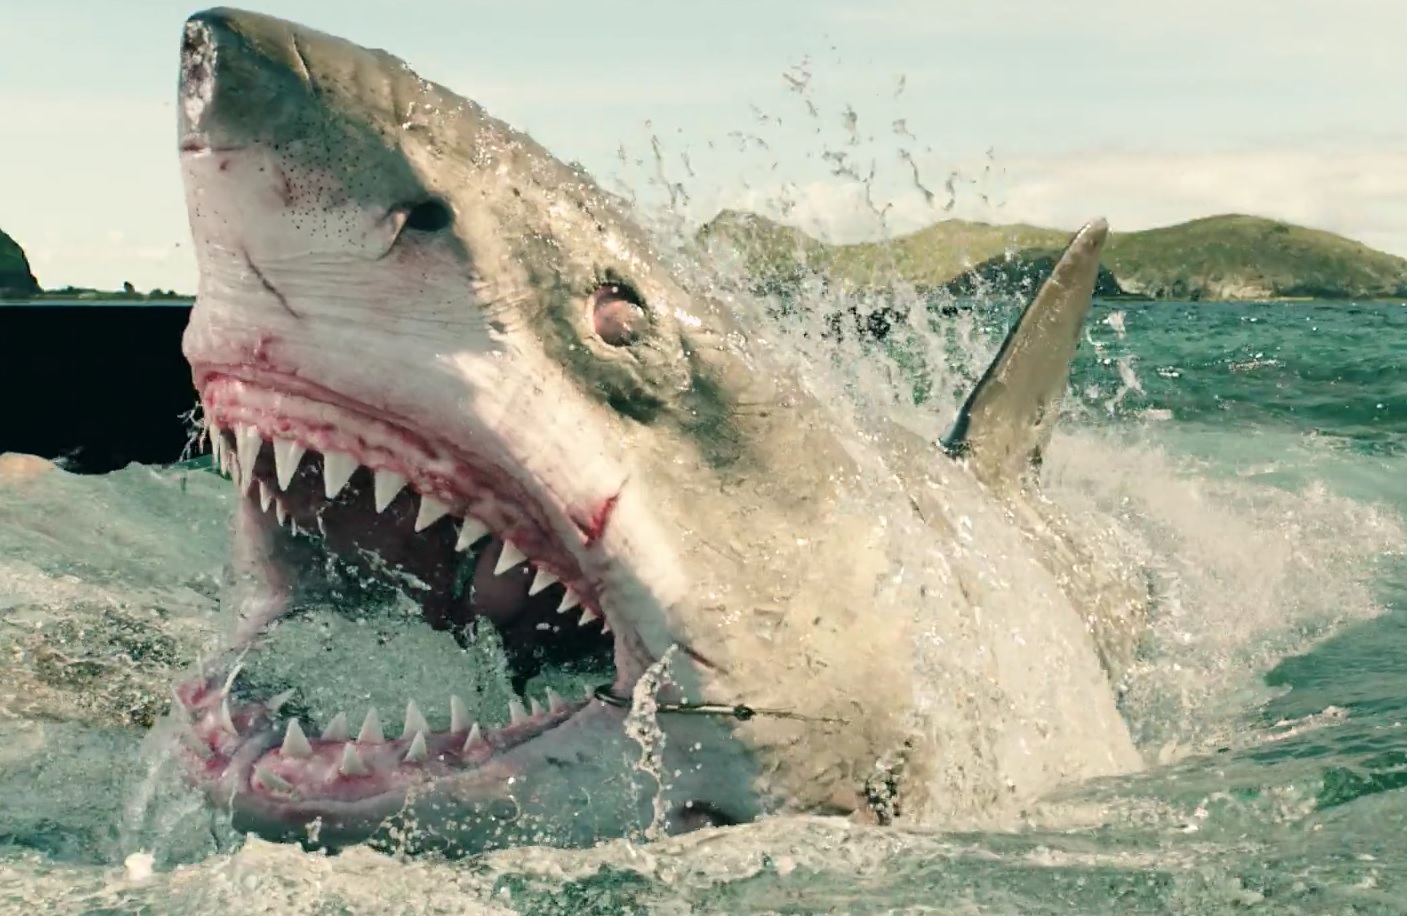 Aussie Horror Film Great White Will Continue The Shark Attack Resurgence - Bloody Disgusting